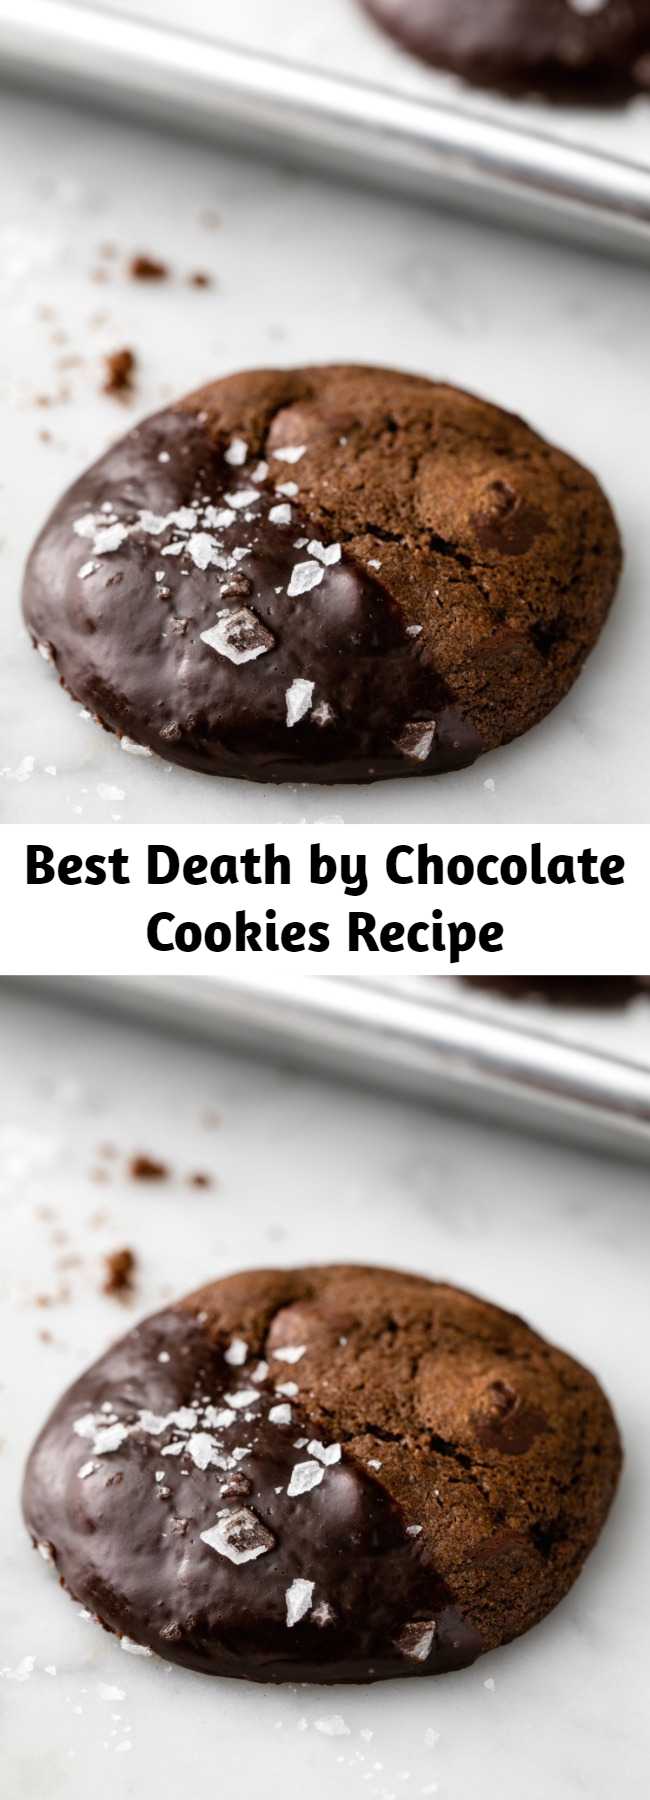 Best Death by Chocolate Cookies Recipe - You've been warned—these death by chocolate cookies are deadly.